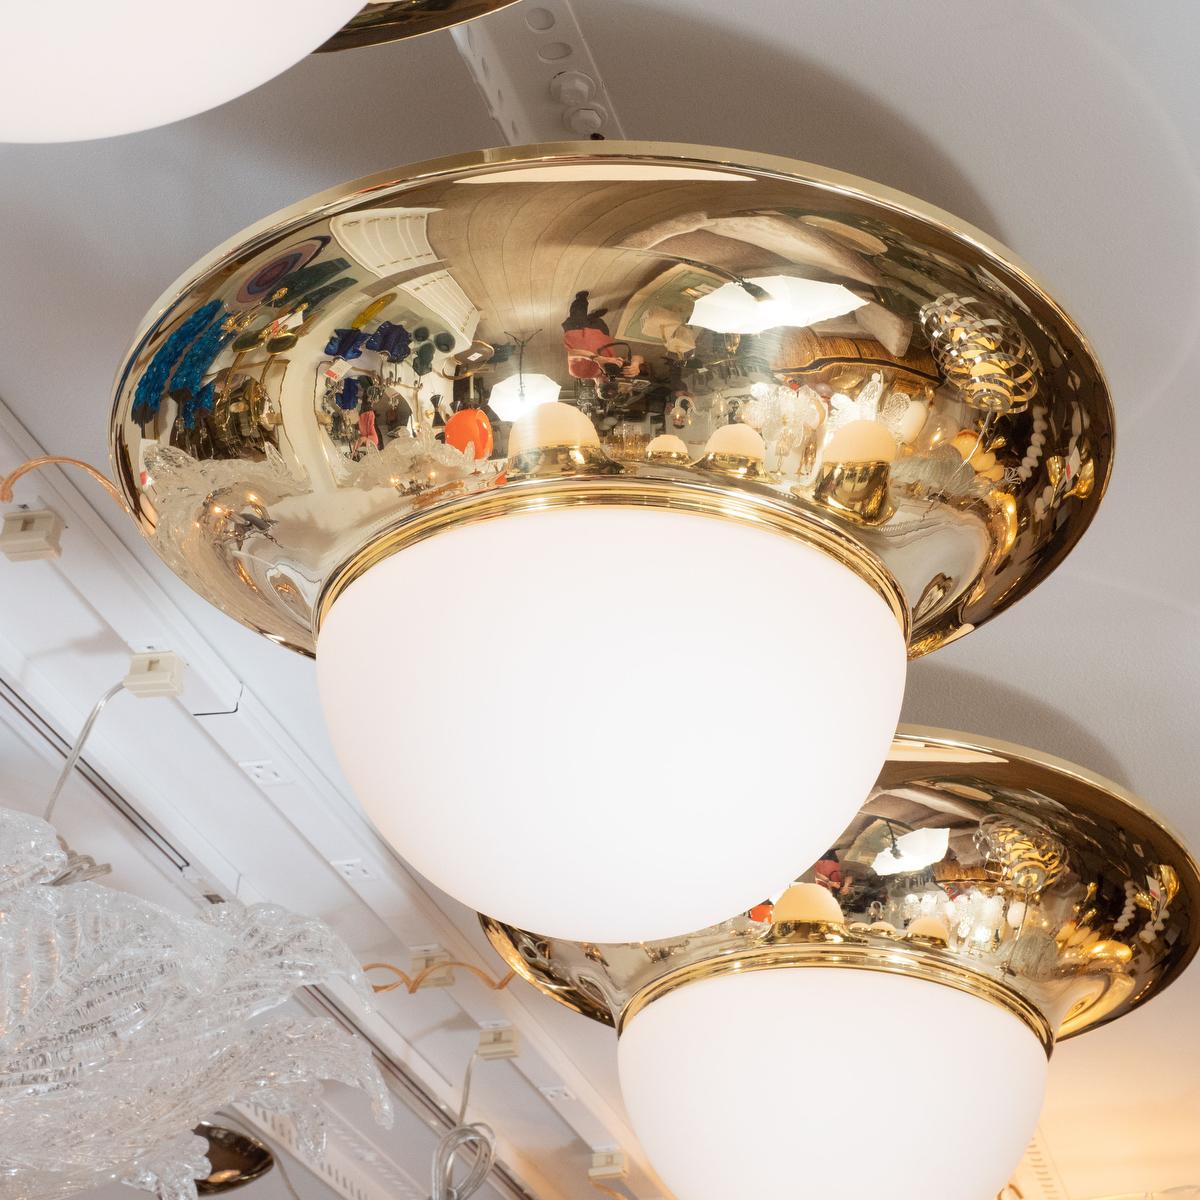 Brass modernist flushmount ceiling fixture with white frosted globe by Luigi Caccia Dominioni.